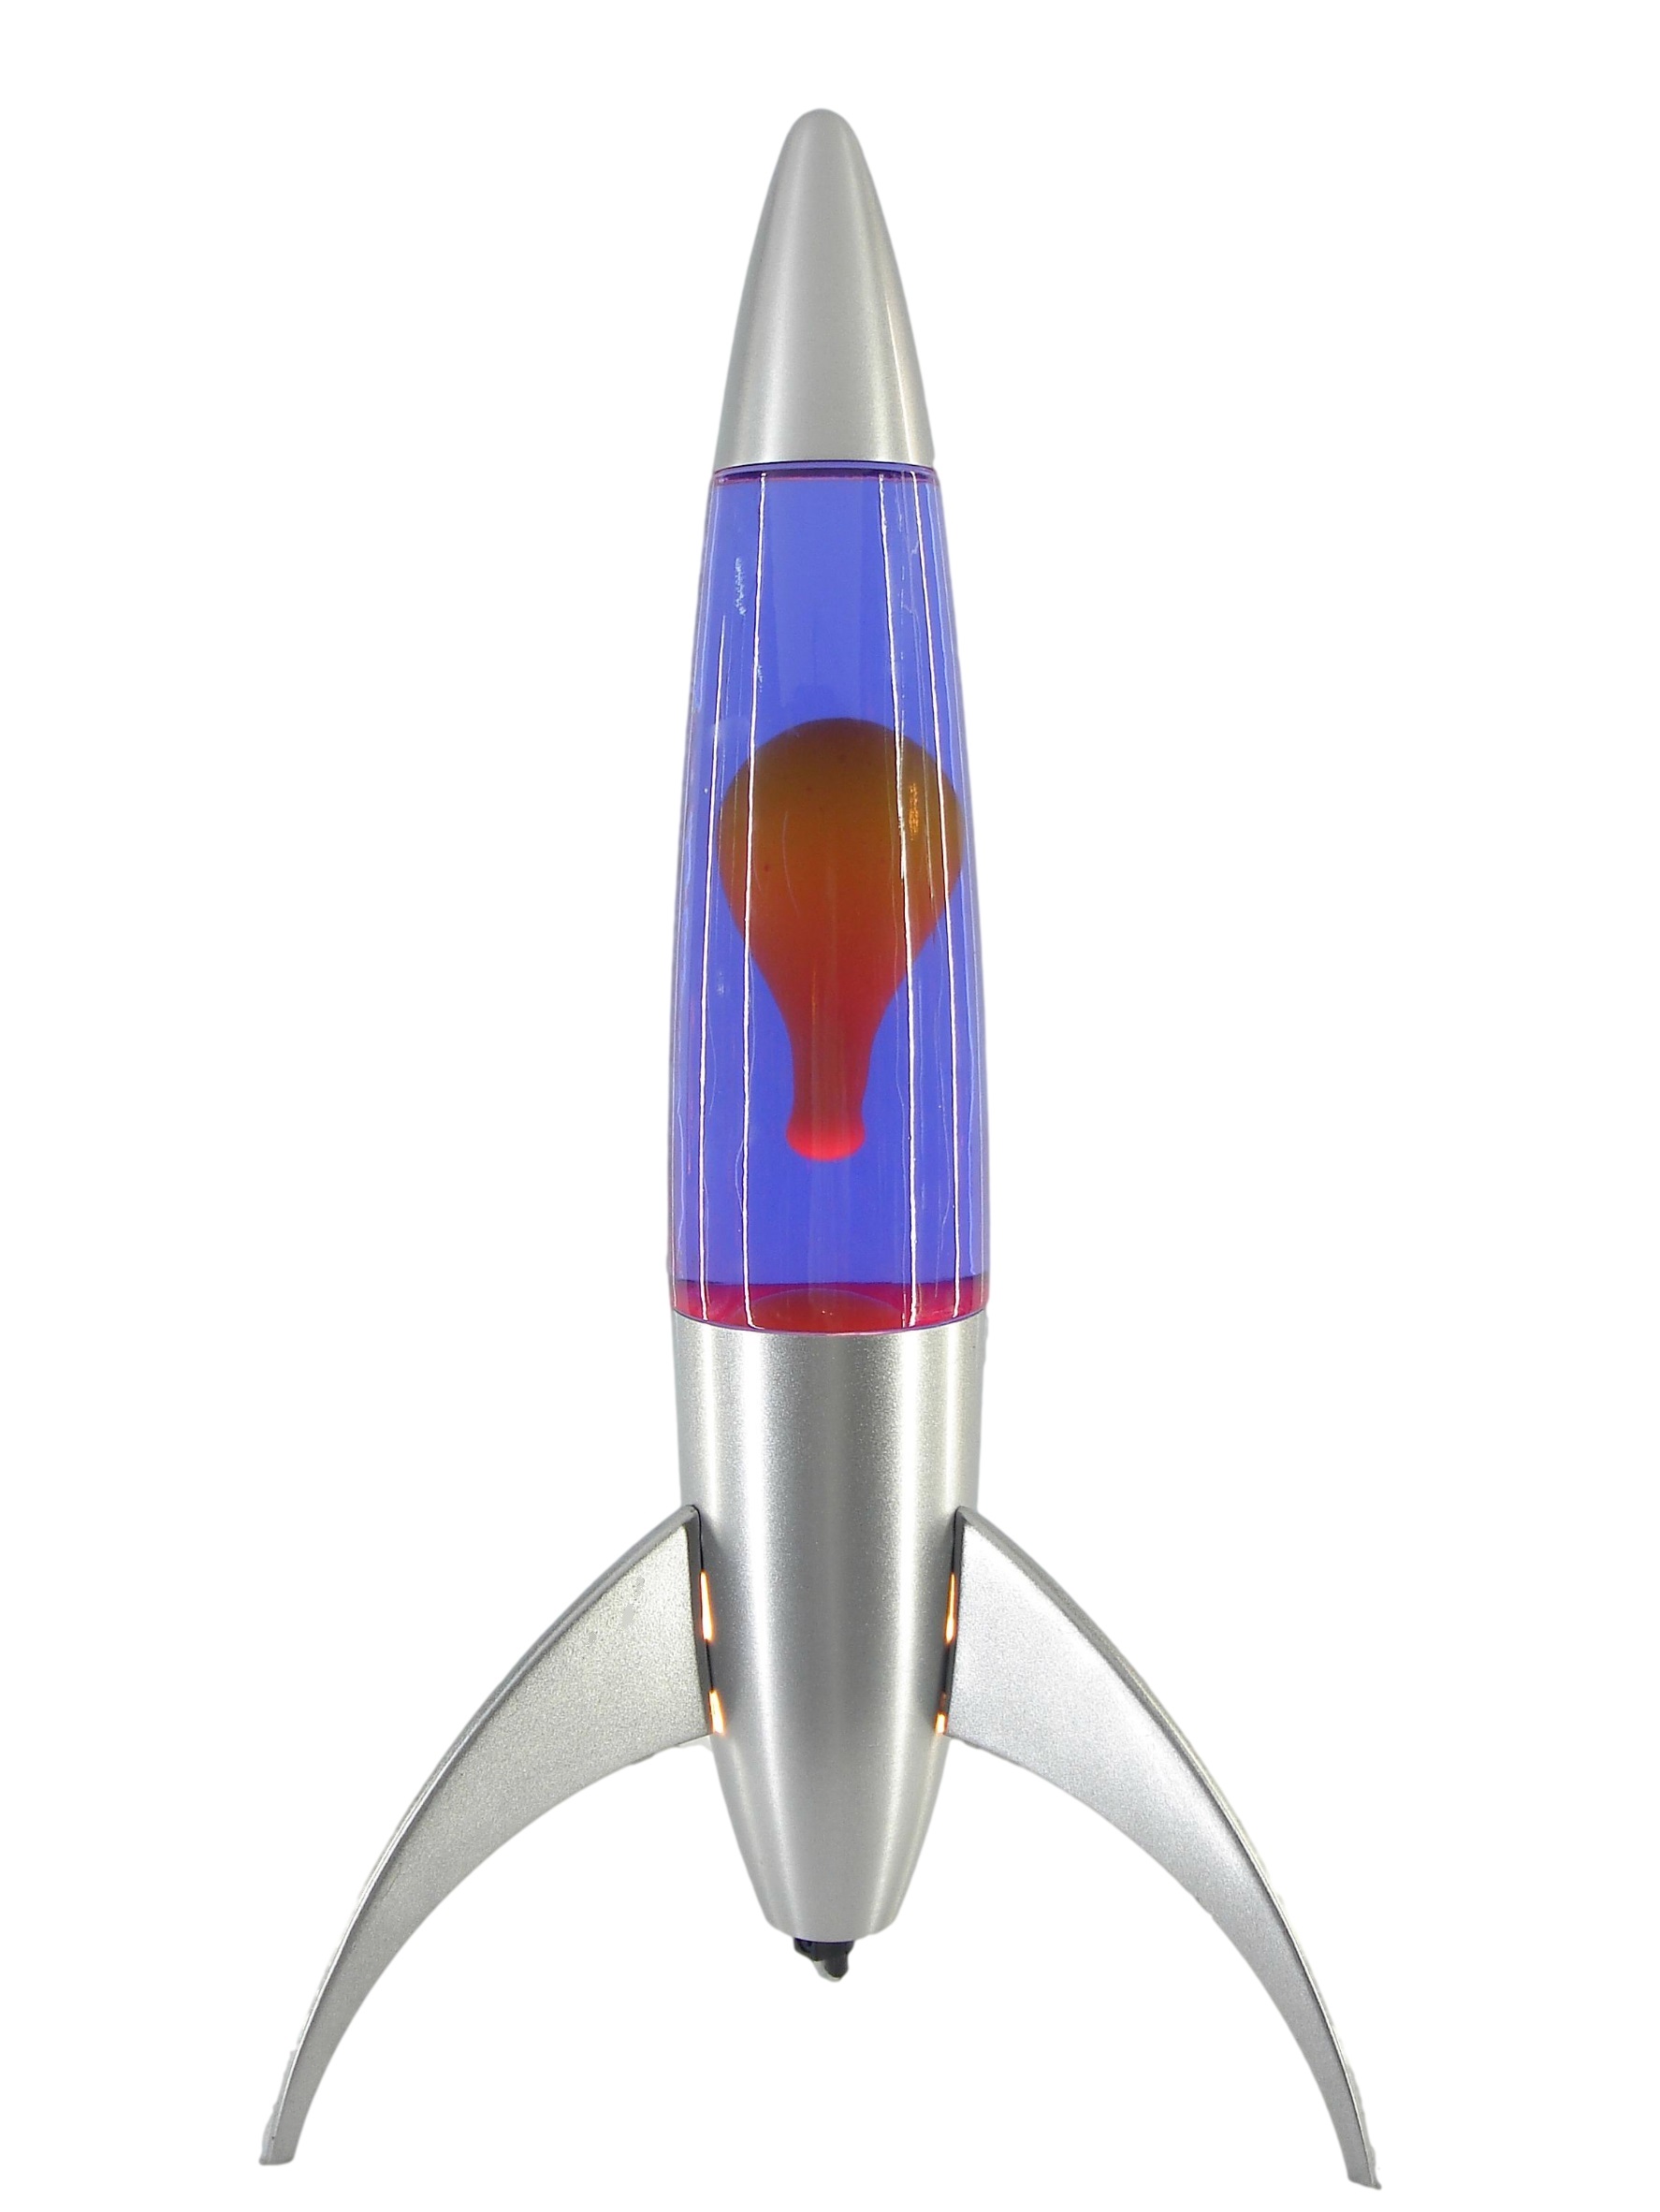 red and blue lava lamp photo - 1